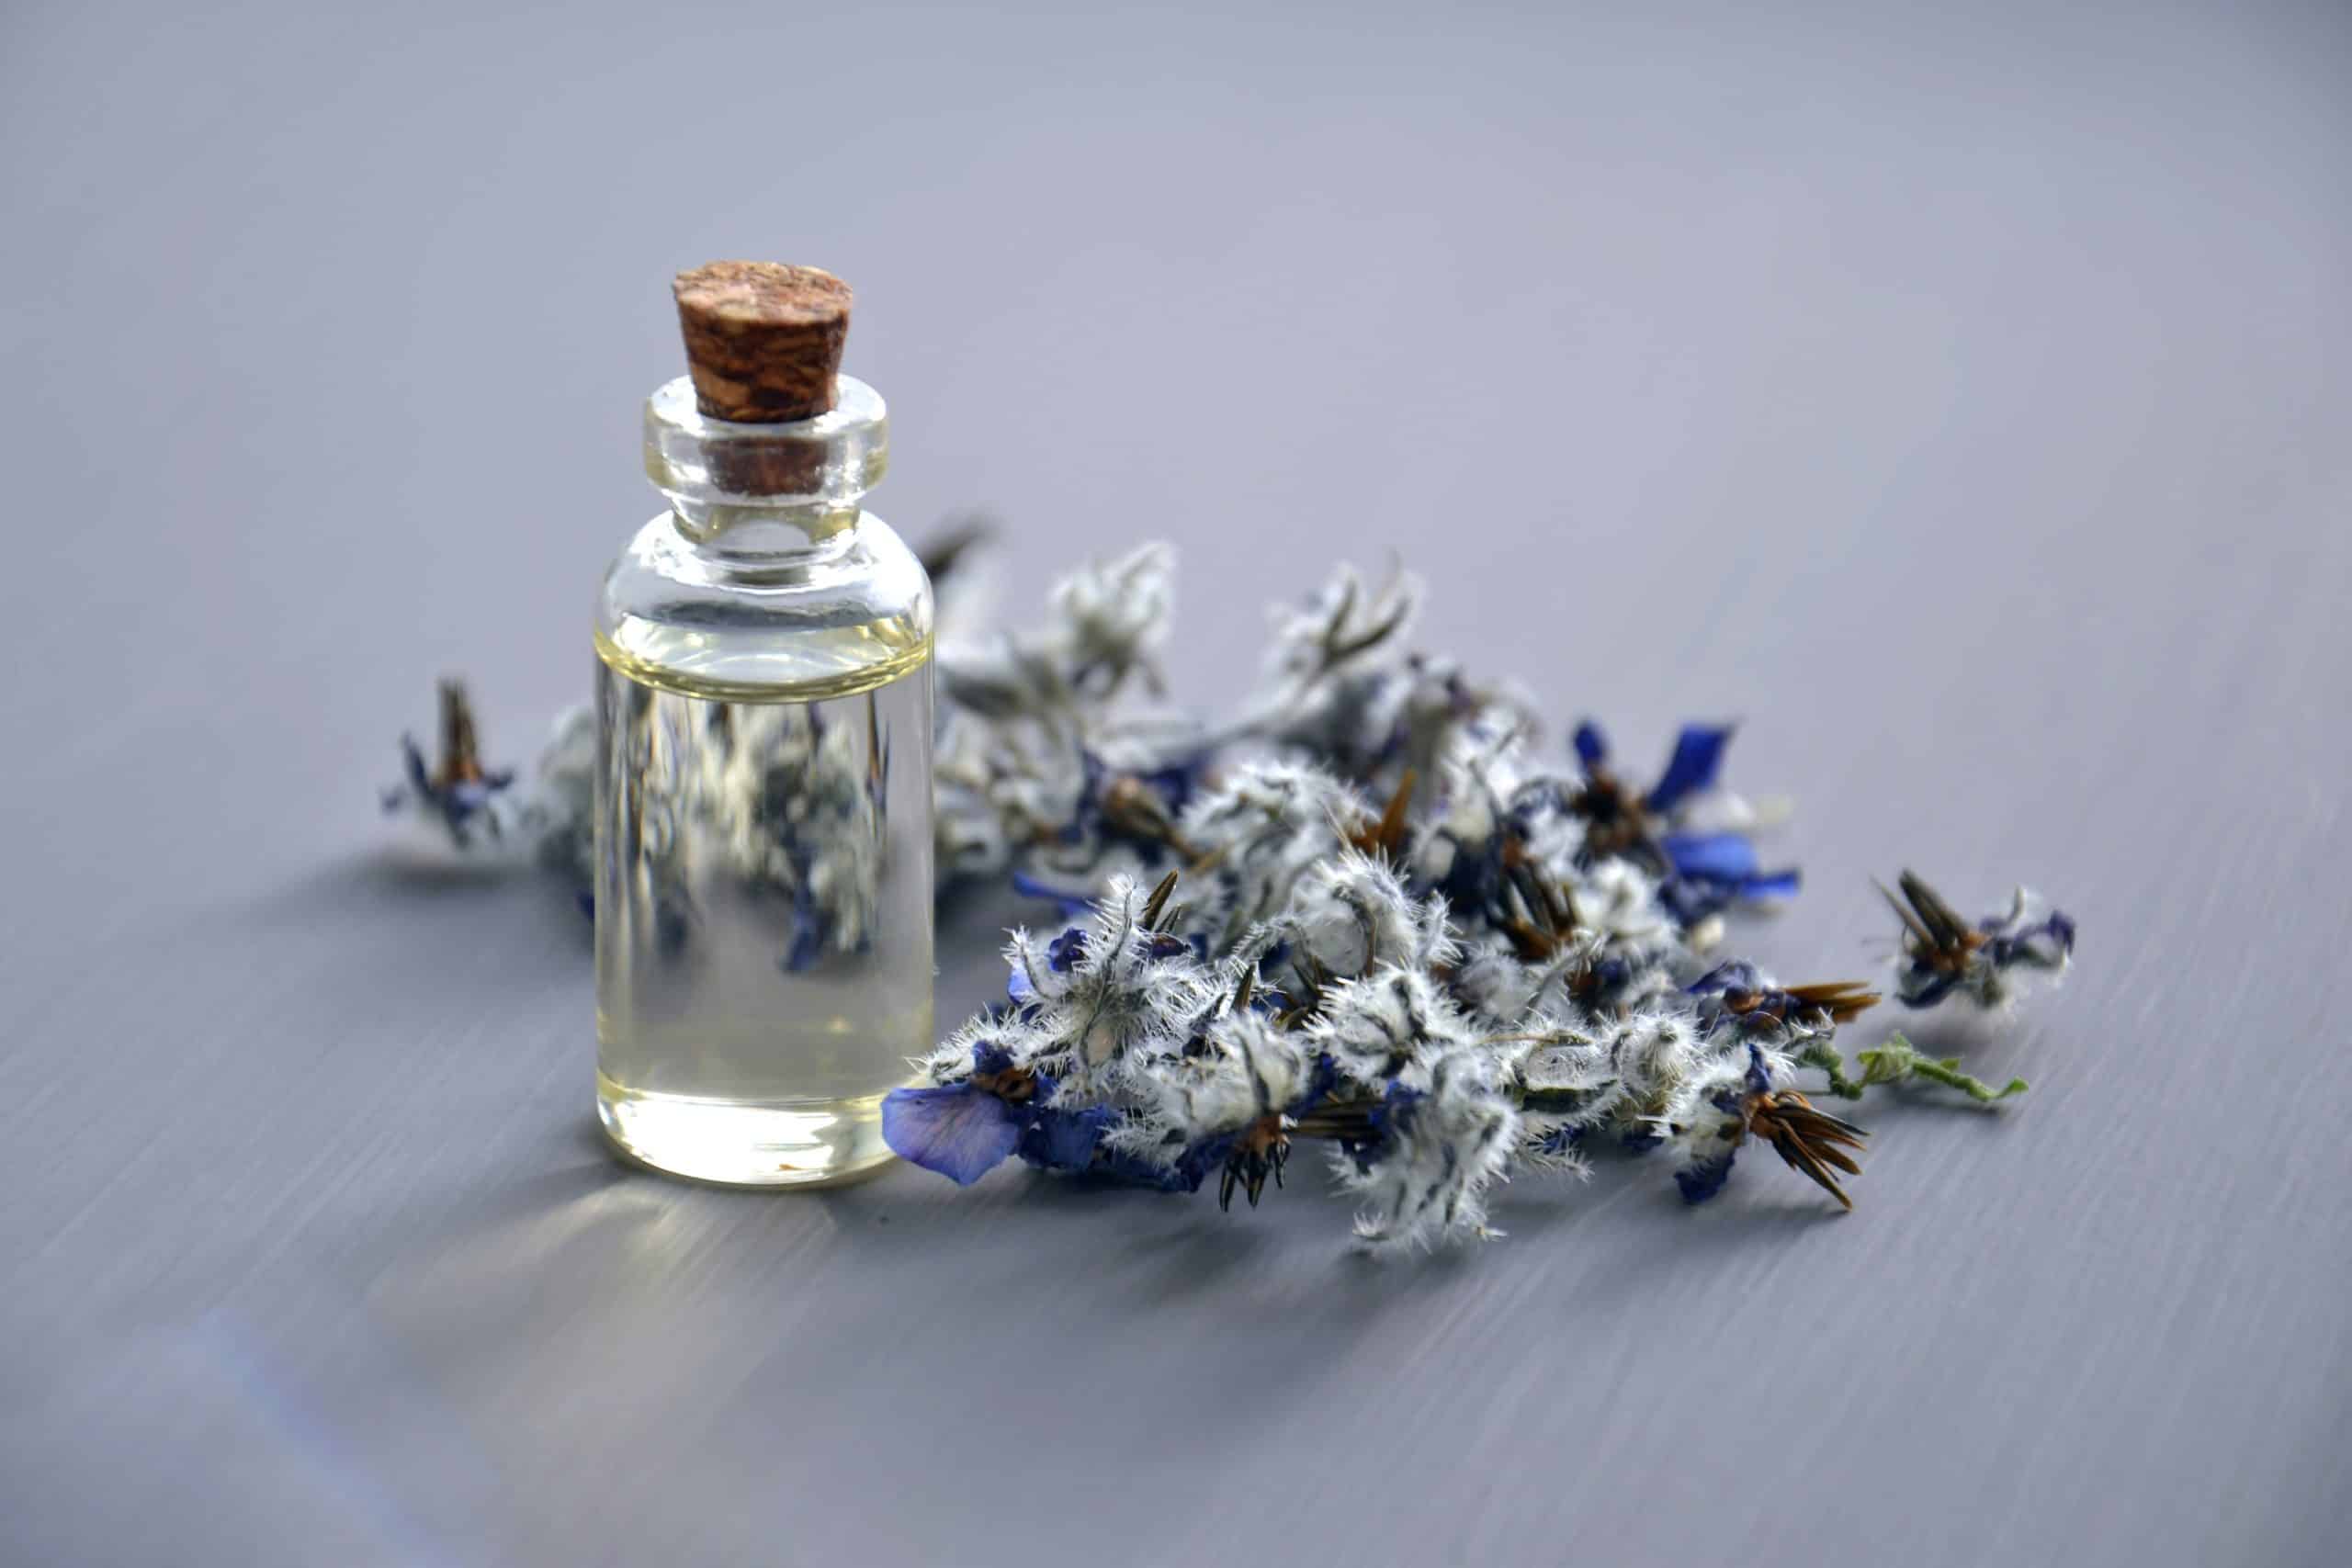 Perfume and flowers. Feature image for podcast episode "Does love have a scent?"